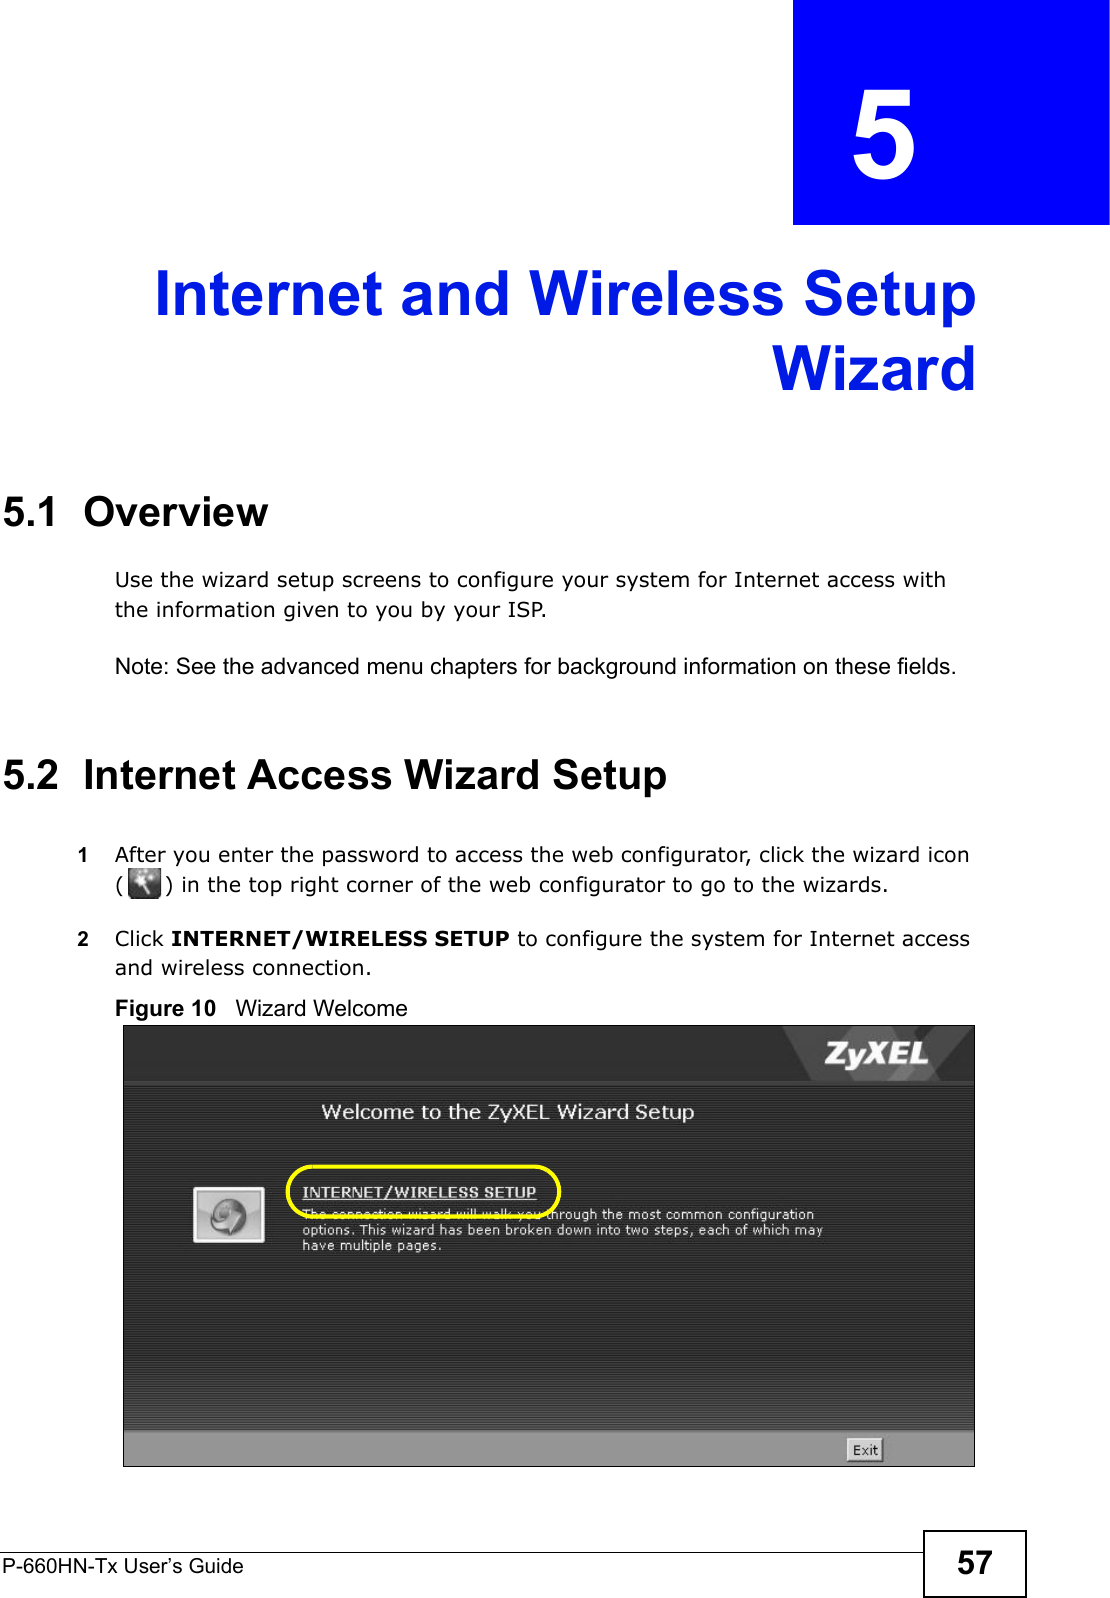 P-660HN-Tx User’s Guide 57CHAPTER  5 Internet and Wireless SetupWizard5.1  OverviewUse the wizard setup screens to configure your system for Internet access with the information given to you by your ISP. Note: See the advanced menu chapters for background information on these fields.5.2  Internet Access Wizard Setup1After you enter the password to access the web configurator, click the wizard icon ( ) in the top right corner of the web configurator to go to the wizards. 2Click INTERNET/WIRELESS SETUP to configure the system for Internet access and wireless connection.Figure 10   Wizard Welcome